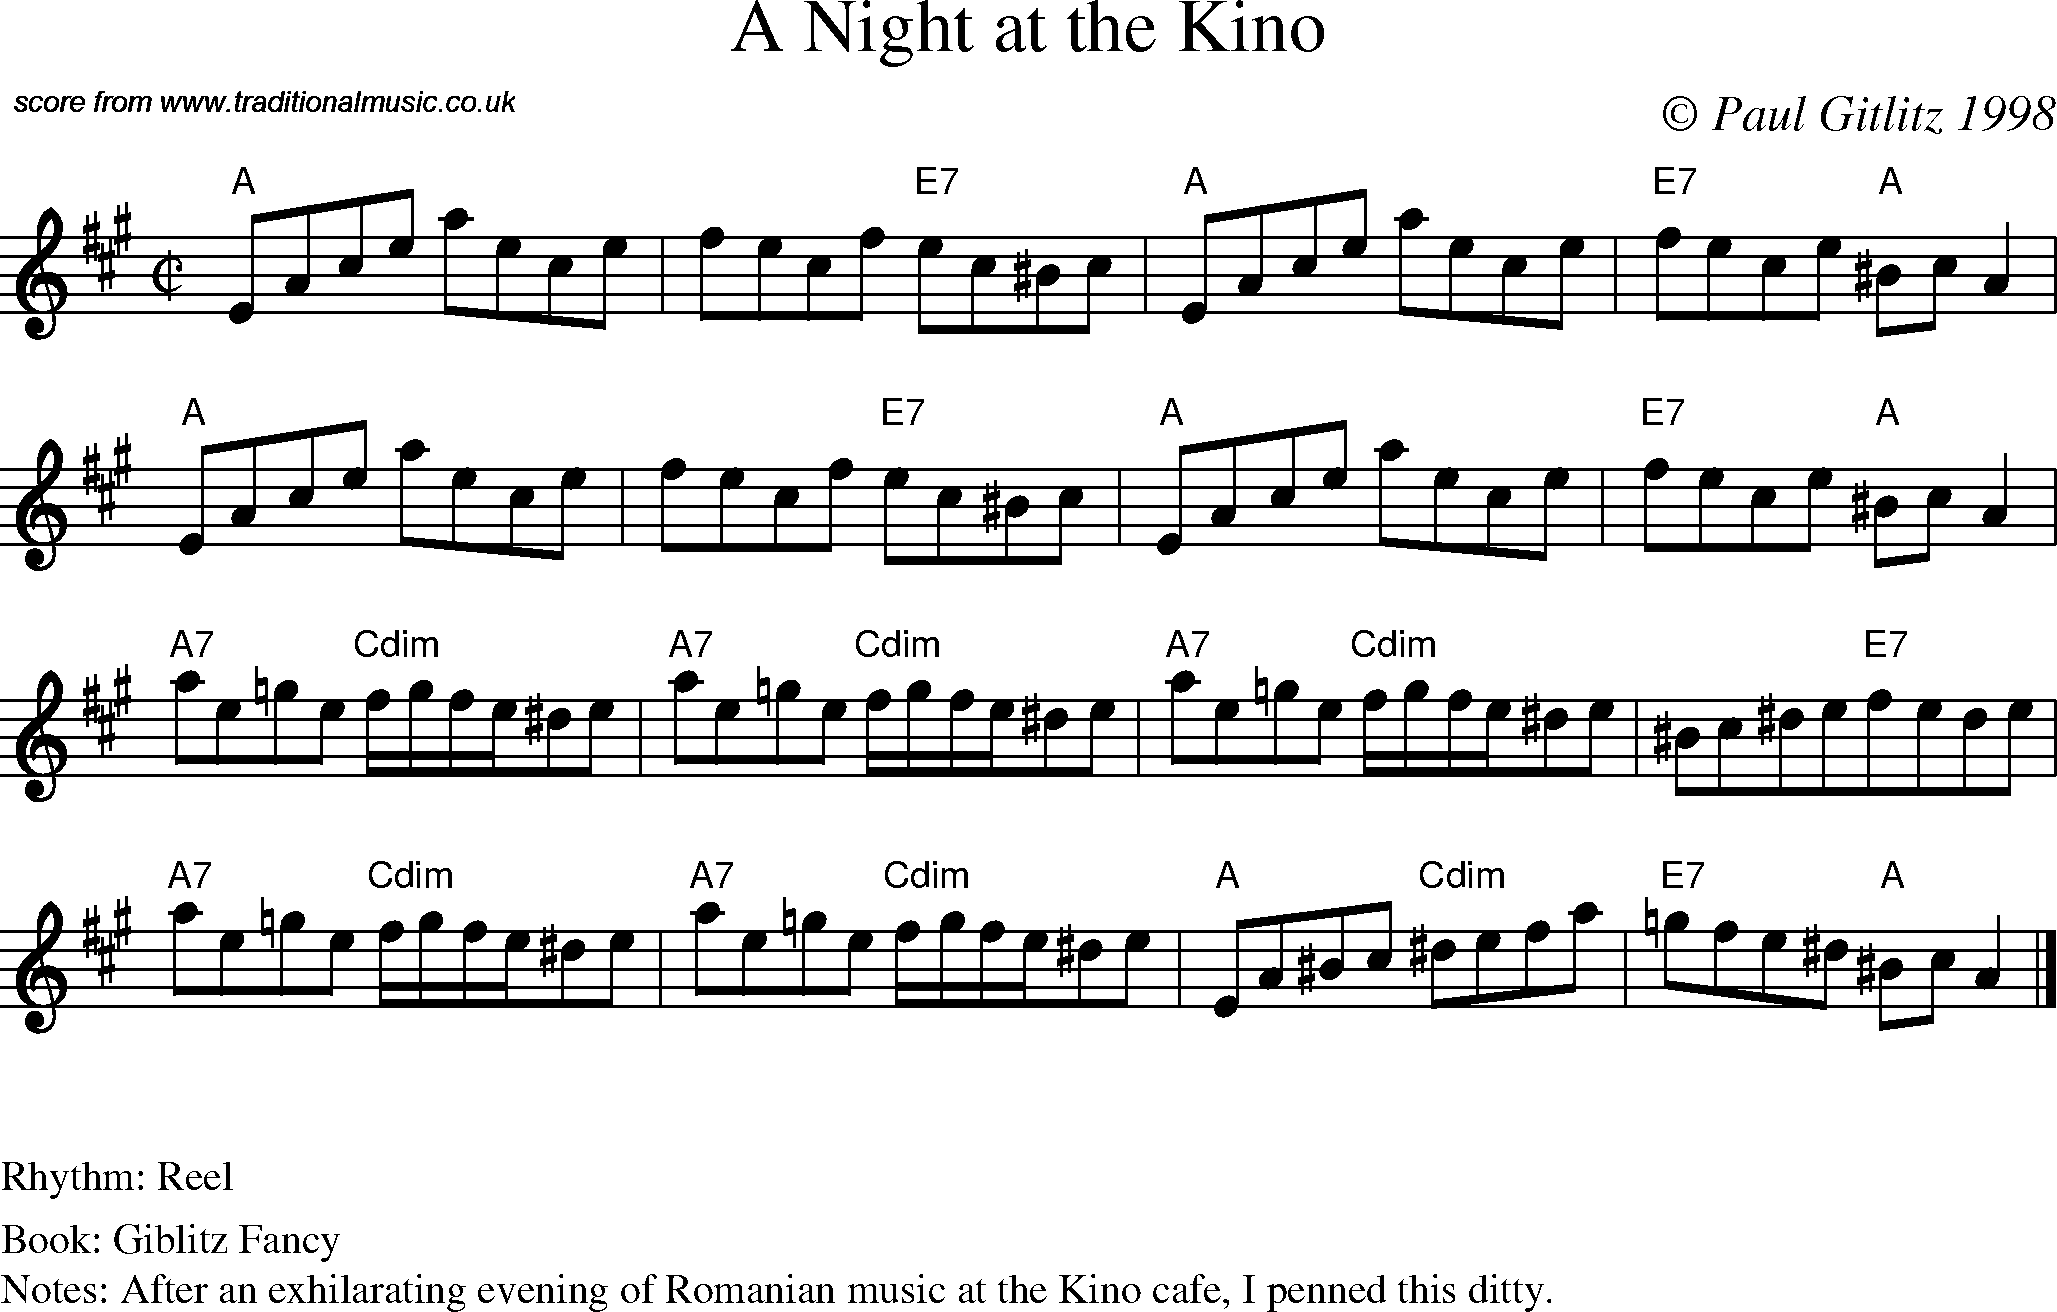 Sheet Music Score for Reel - A Night at the Kino